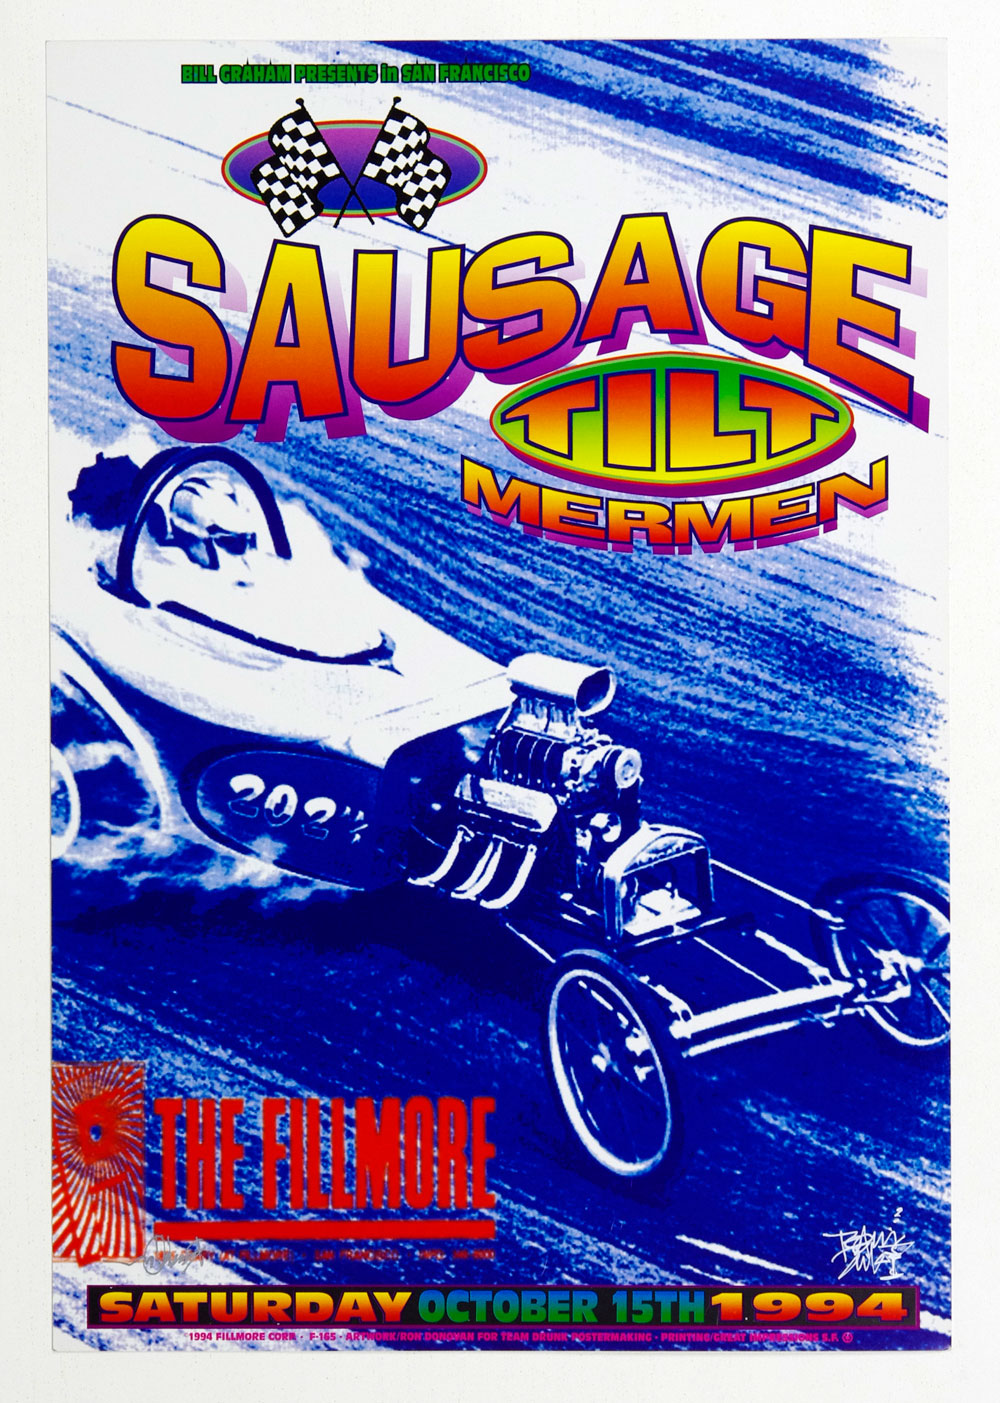 Sausage Poster 1994 Oct 15  New Fillmore Rodonovan Signed